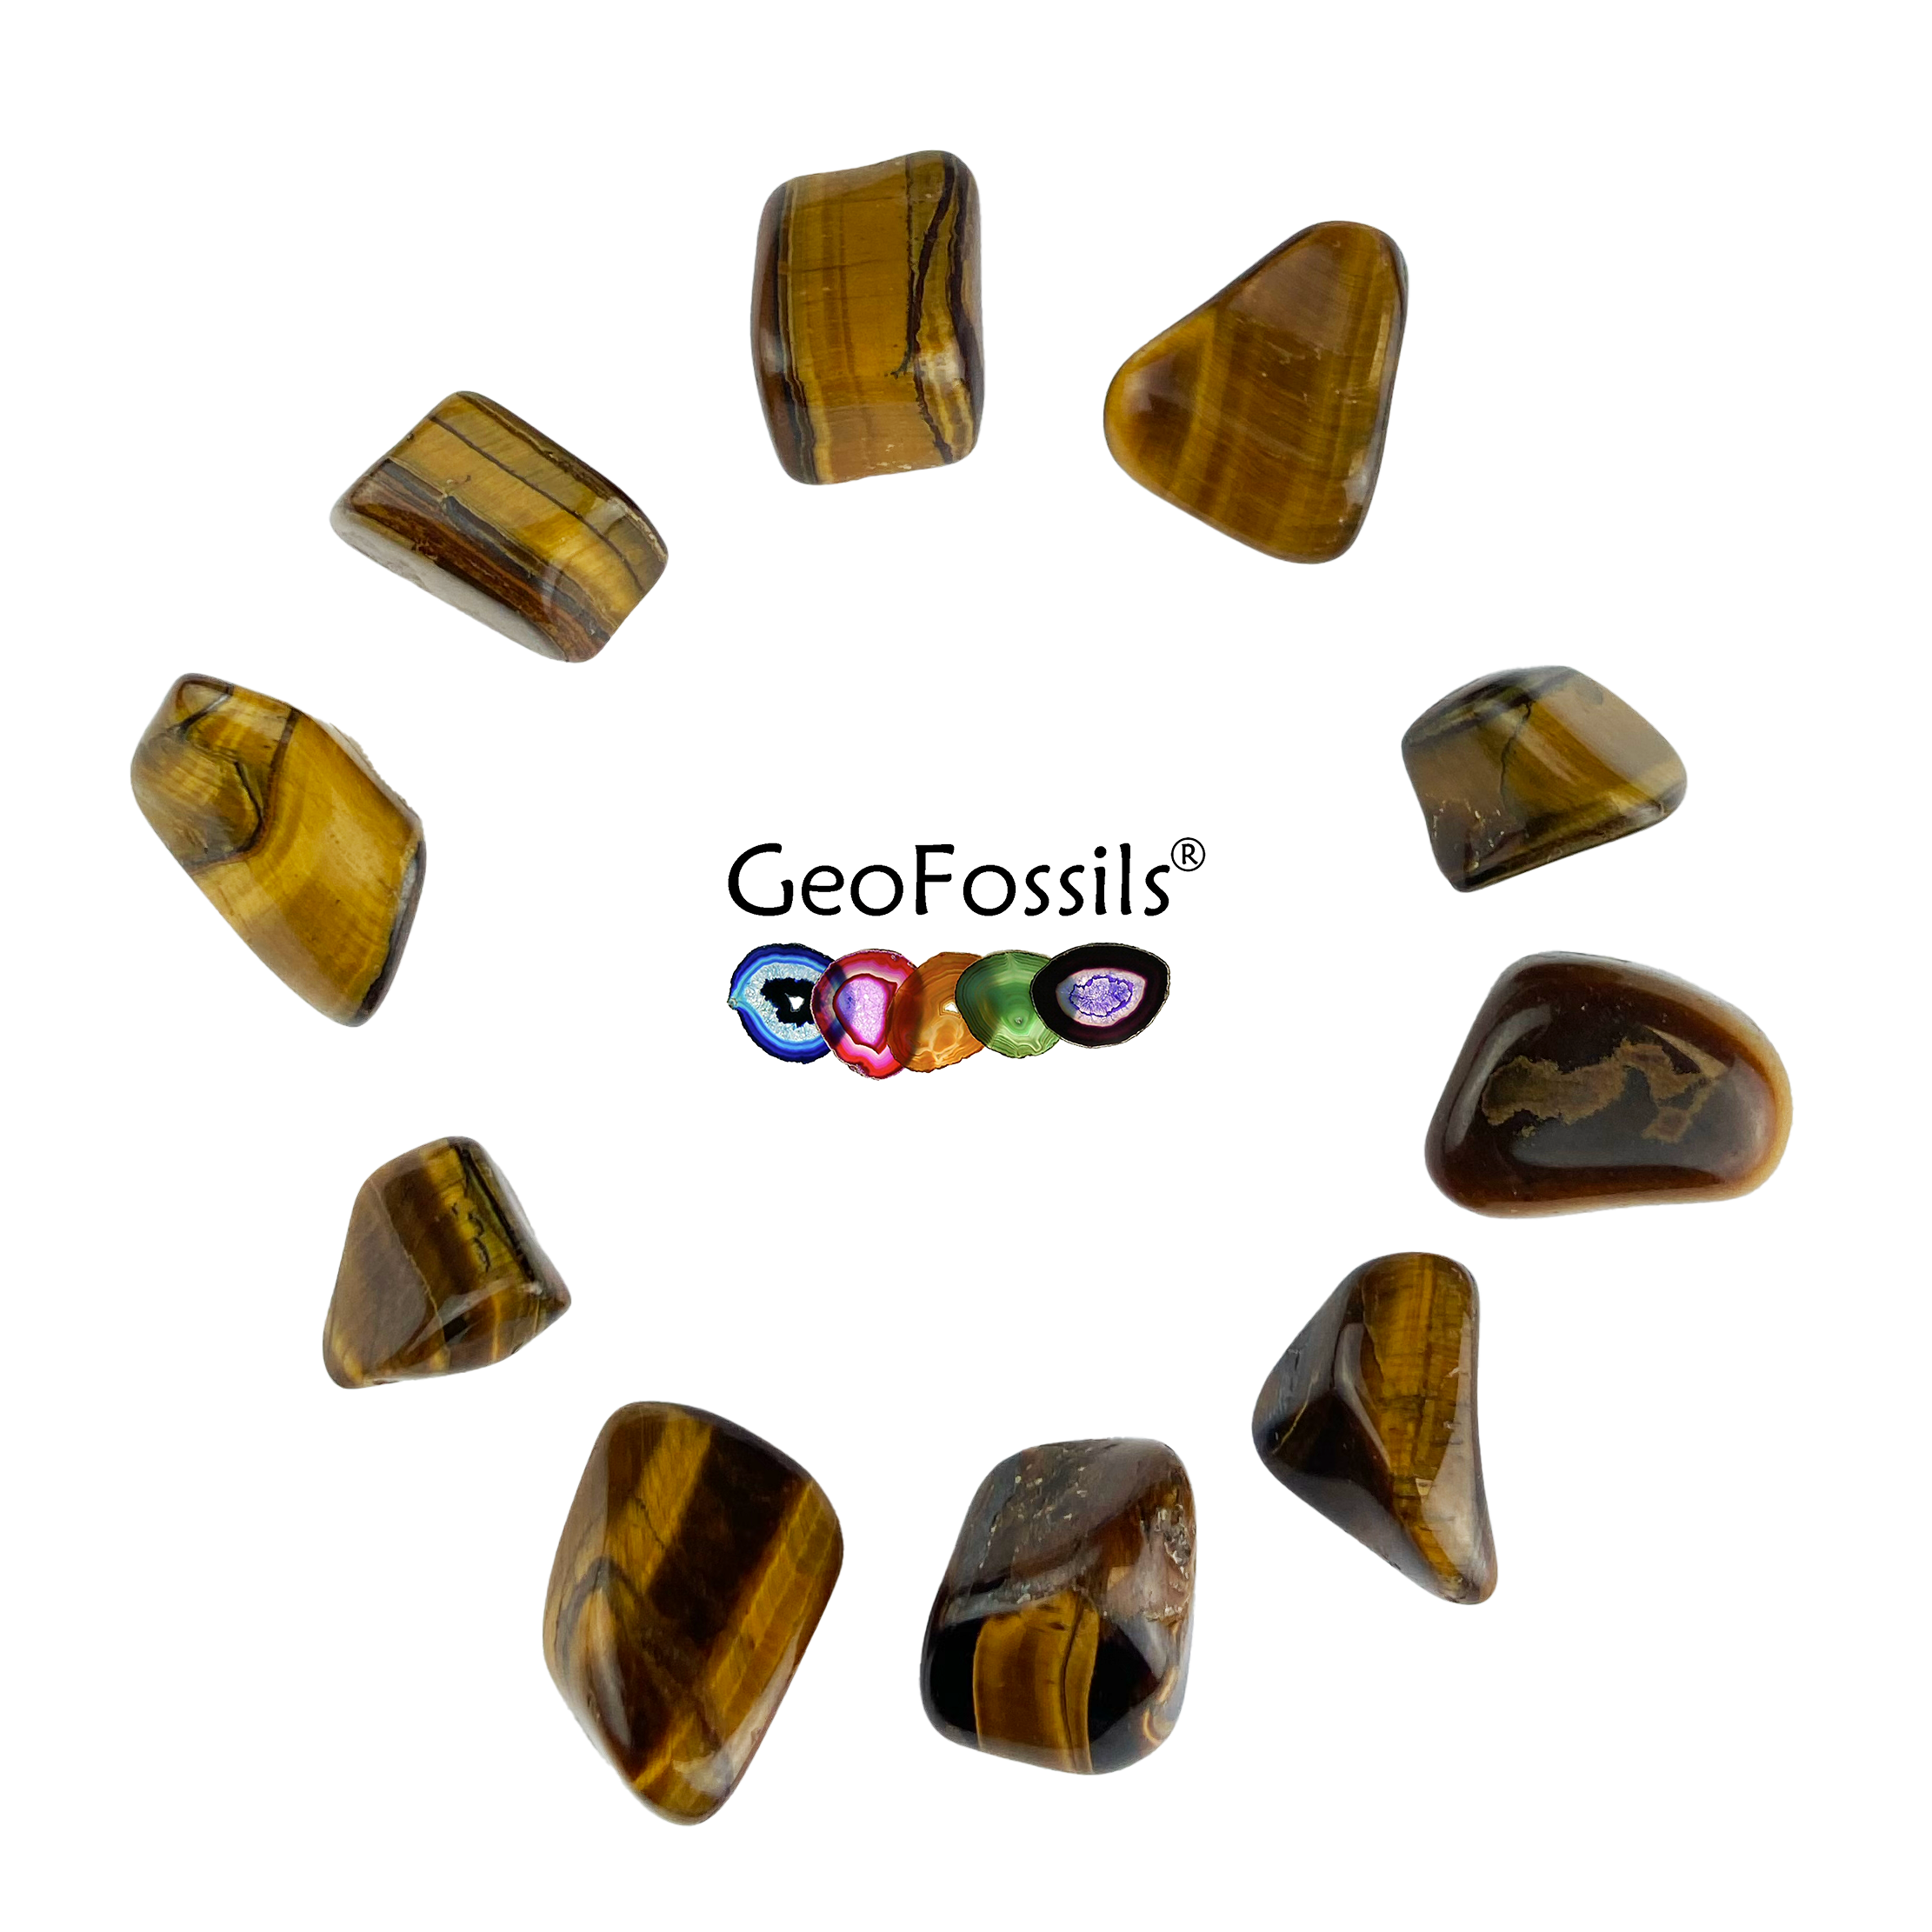 Geofossils Gold Tigers Eye Polished Tumble Stone Healing Crystals